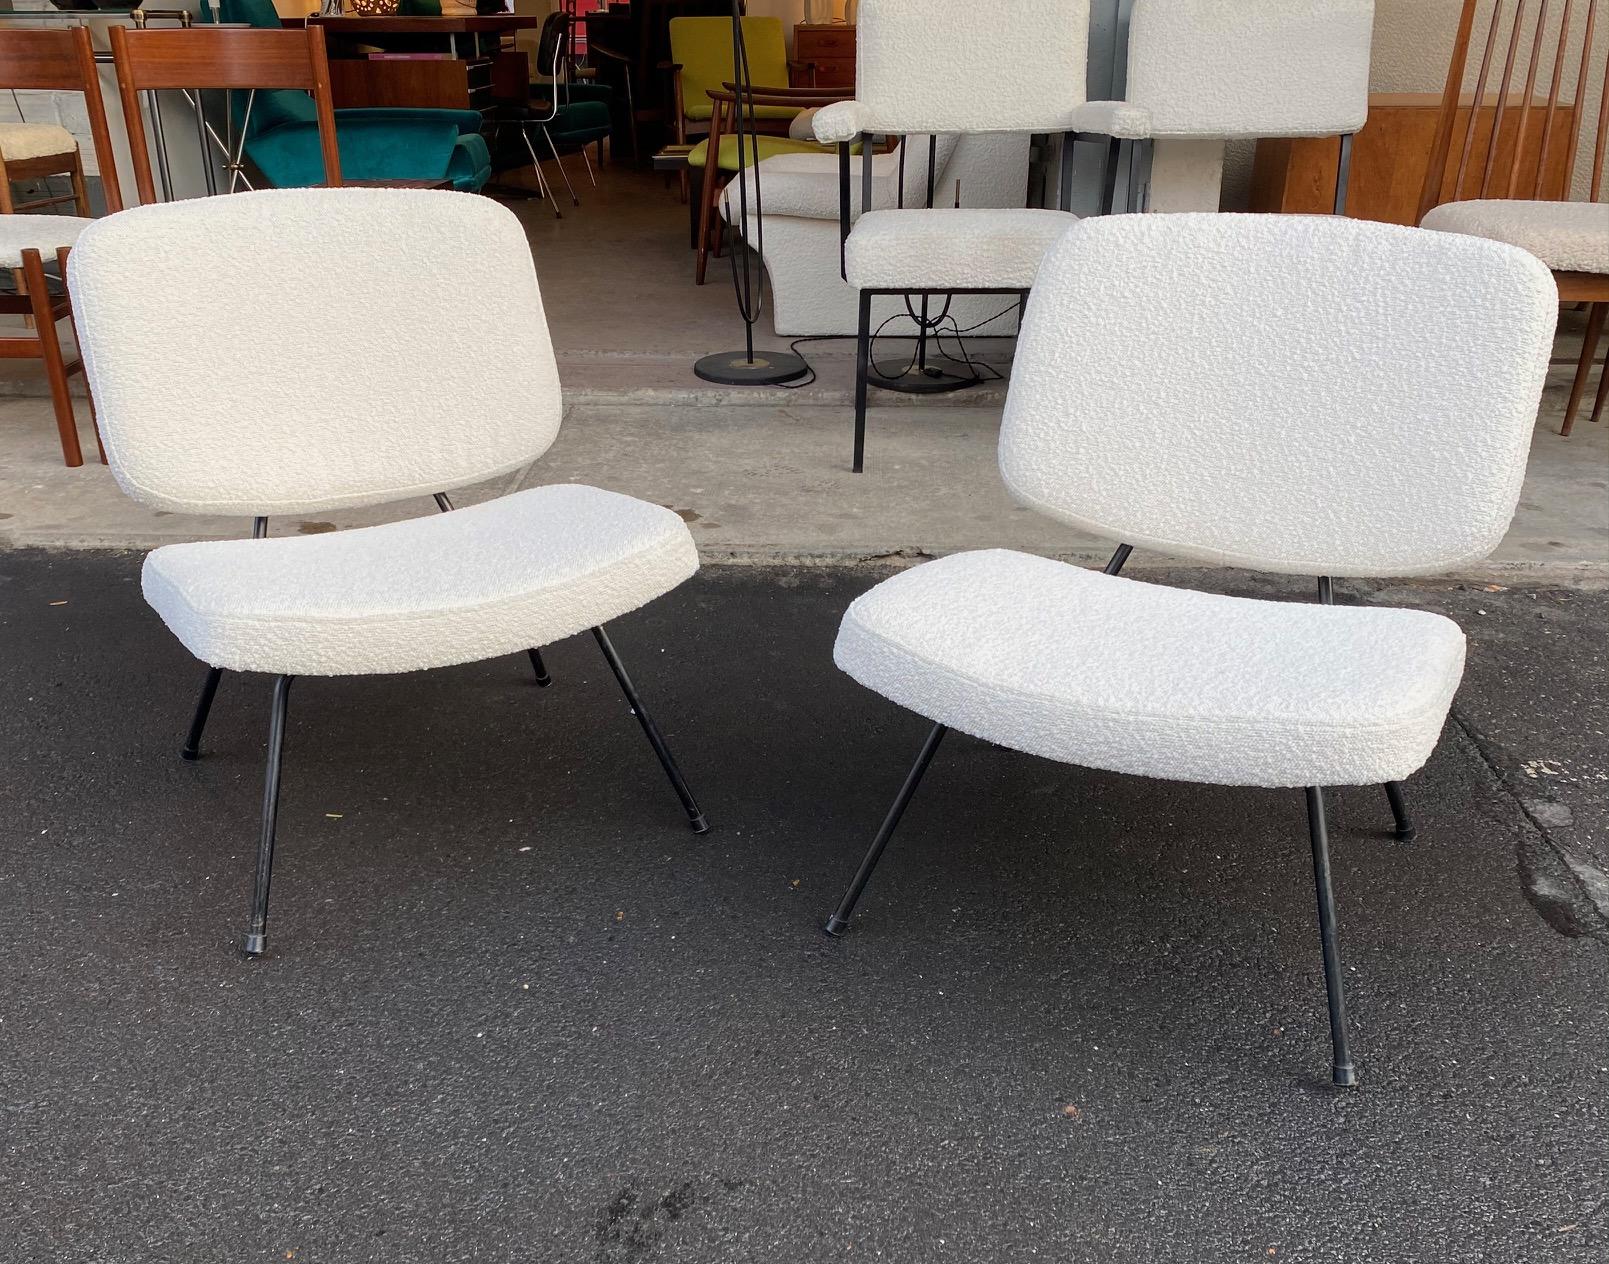 Pair of CM190 slipper chairs by Pierre Paulin for Thonet, France, 1950s
Recently reupholstered with a cream/white fabric.